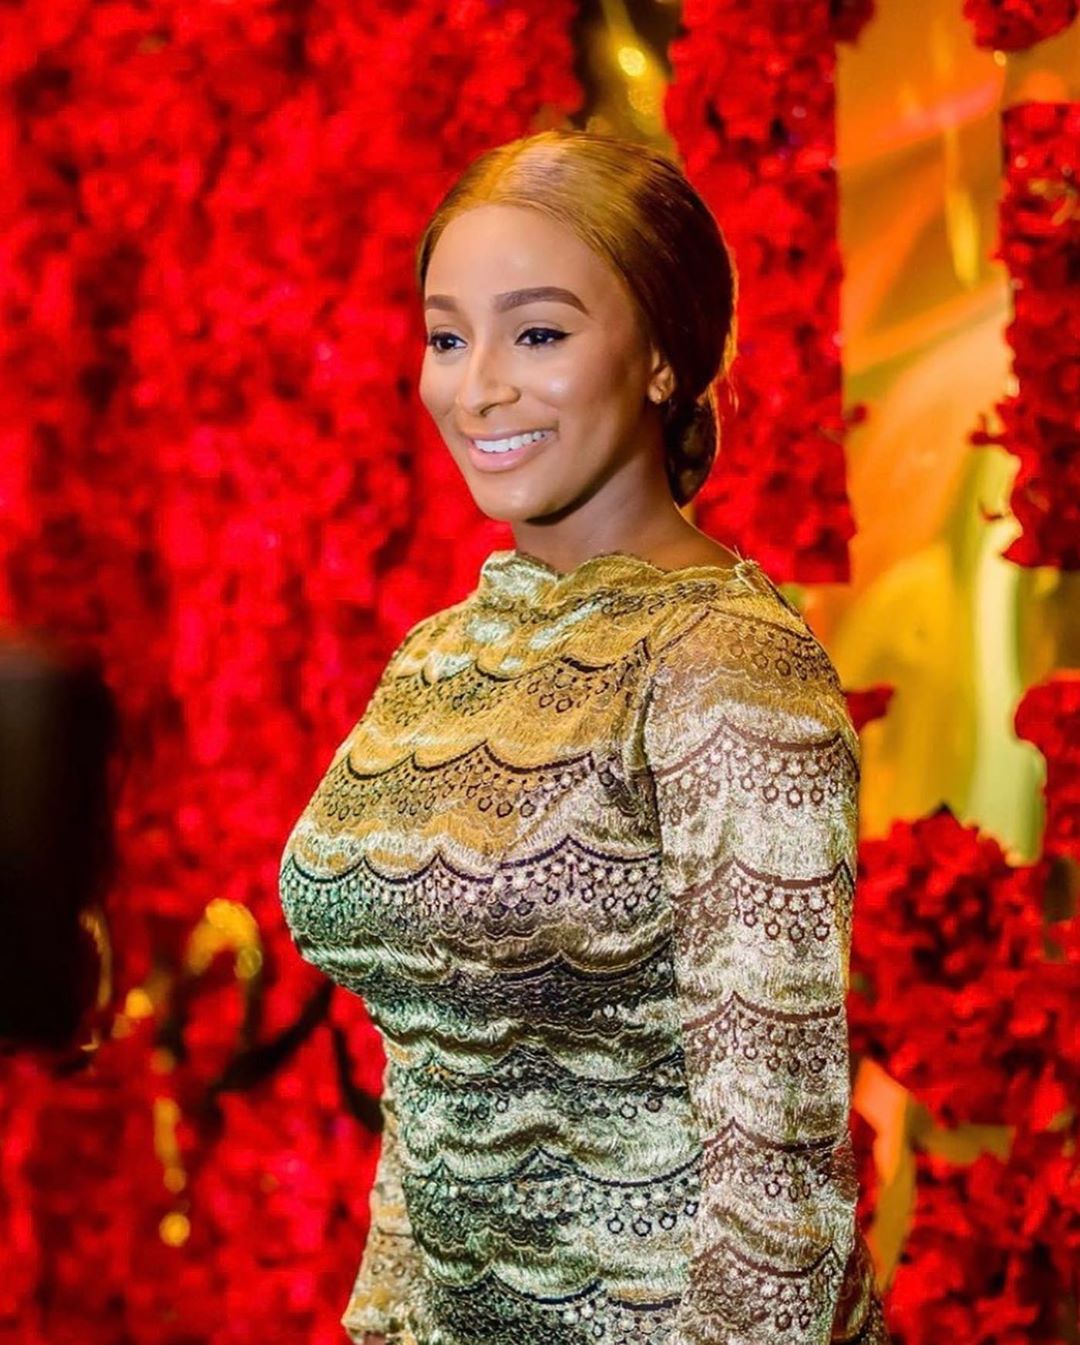 I will enjoy myself even though I don't have a man - DJ Cuppy says as she parties wild (Photos)